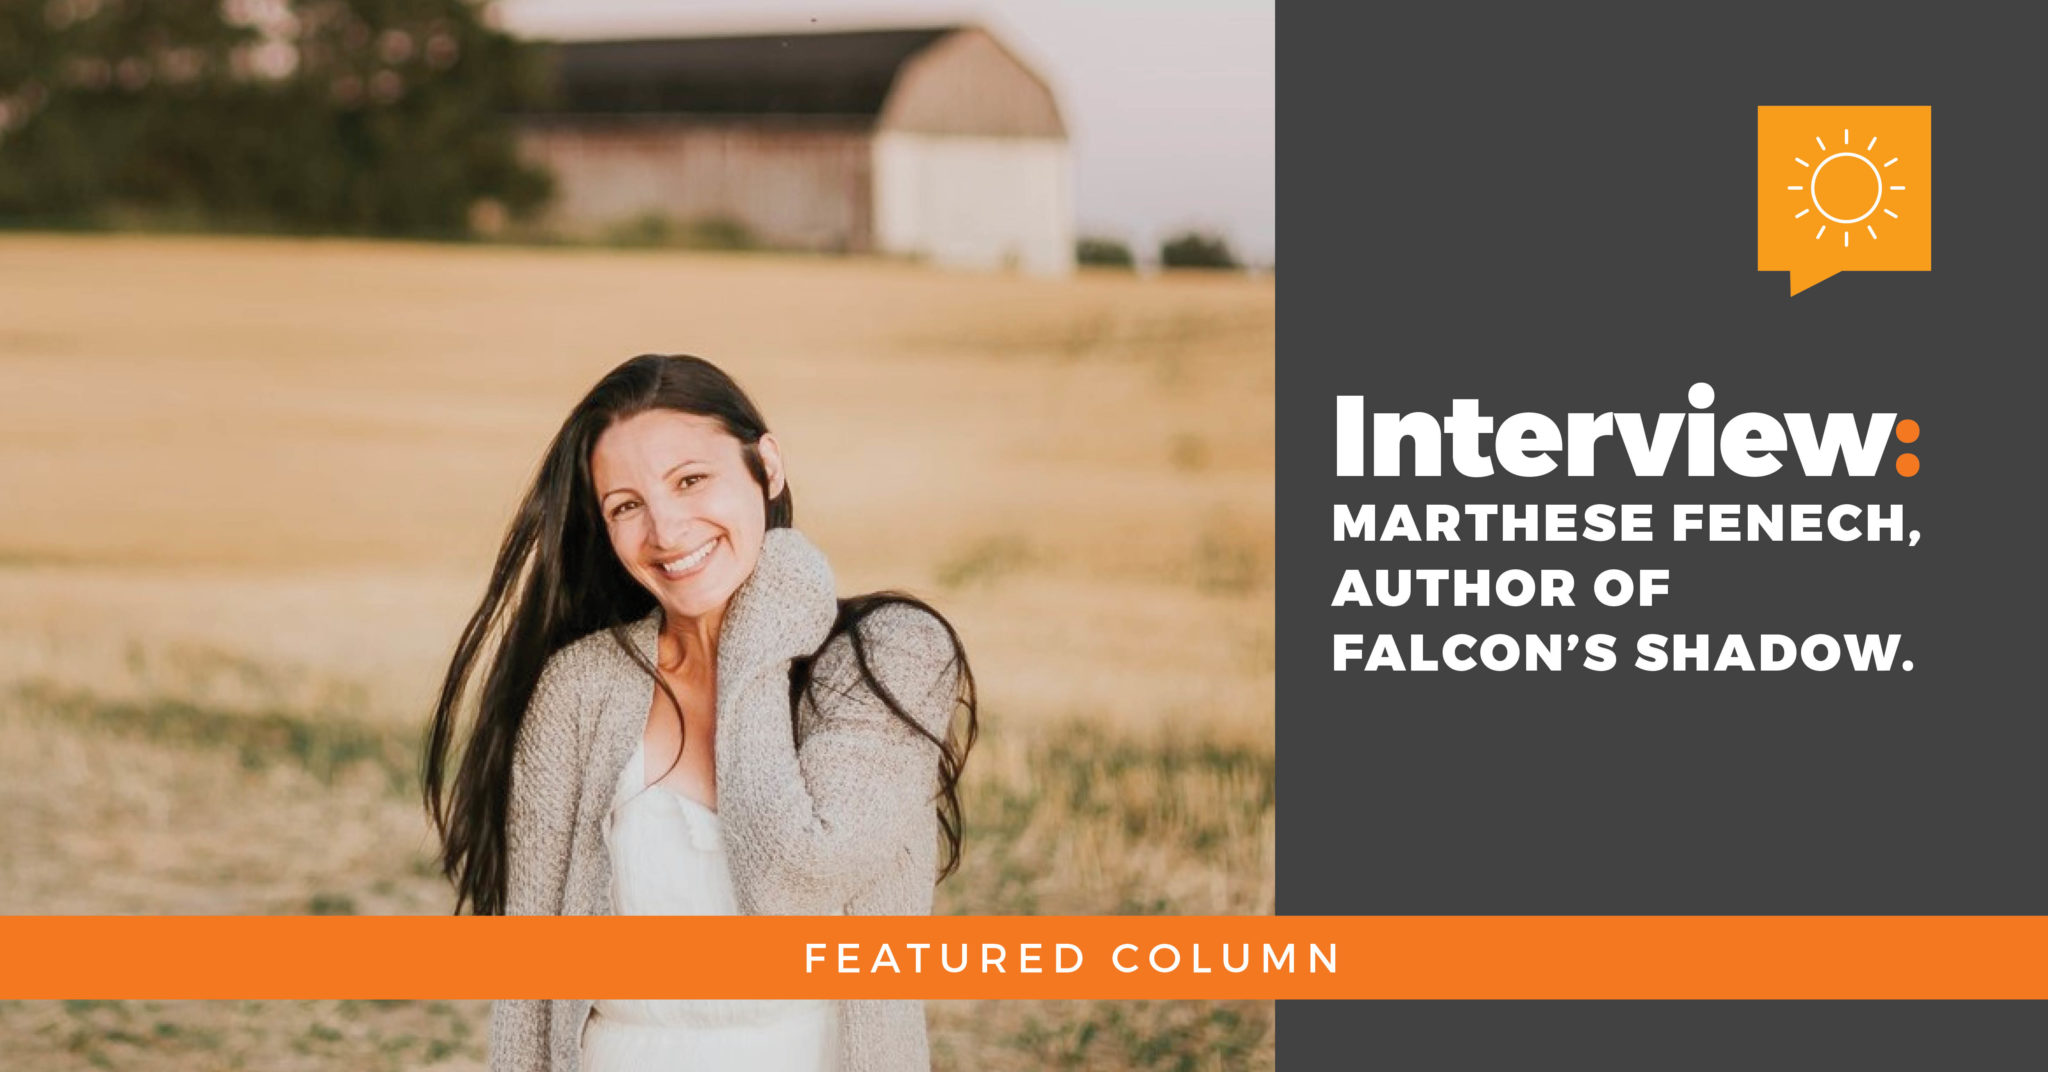 Interview: Marthese Fenech, Author of Falcon’s Shadow.